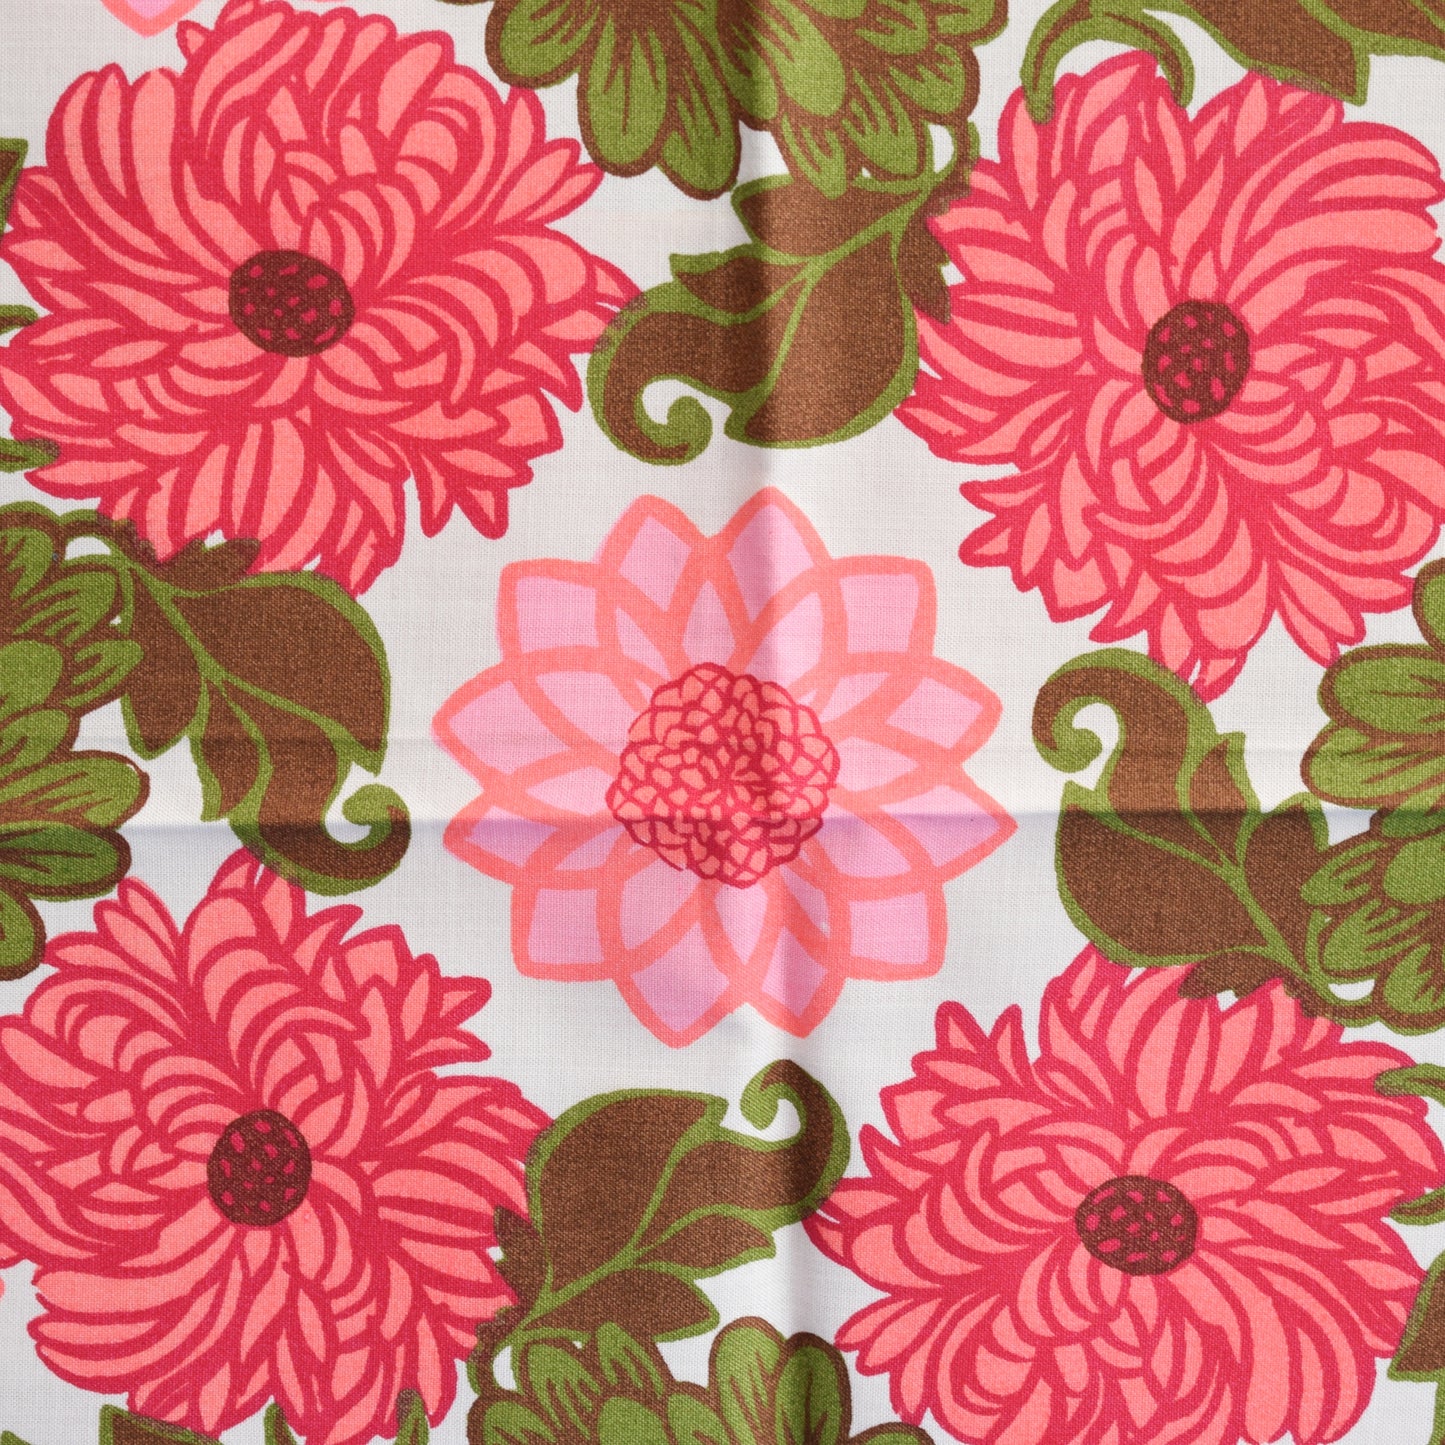 Vintage 1970s Tablecloth - Flower Power - Pinks